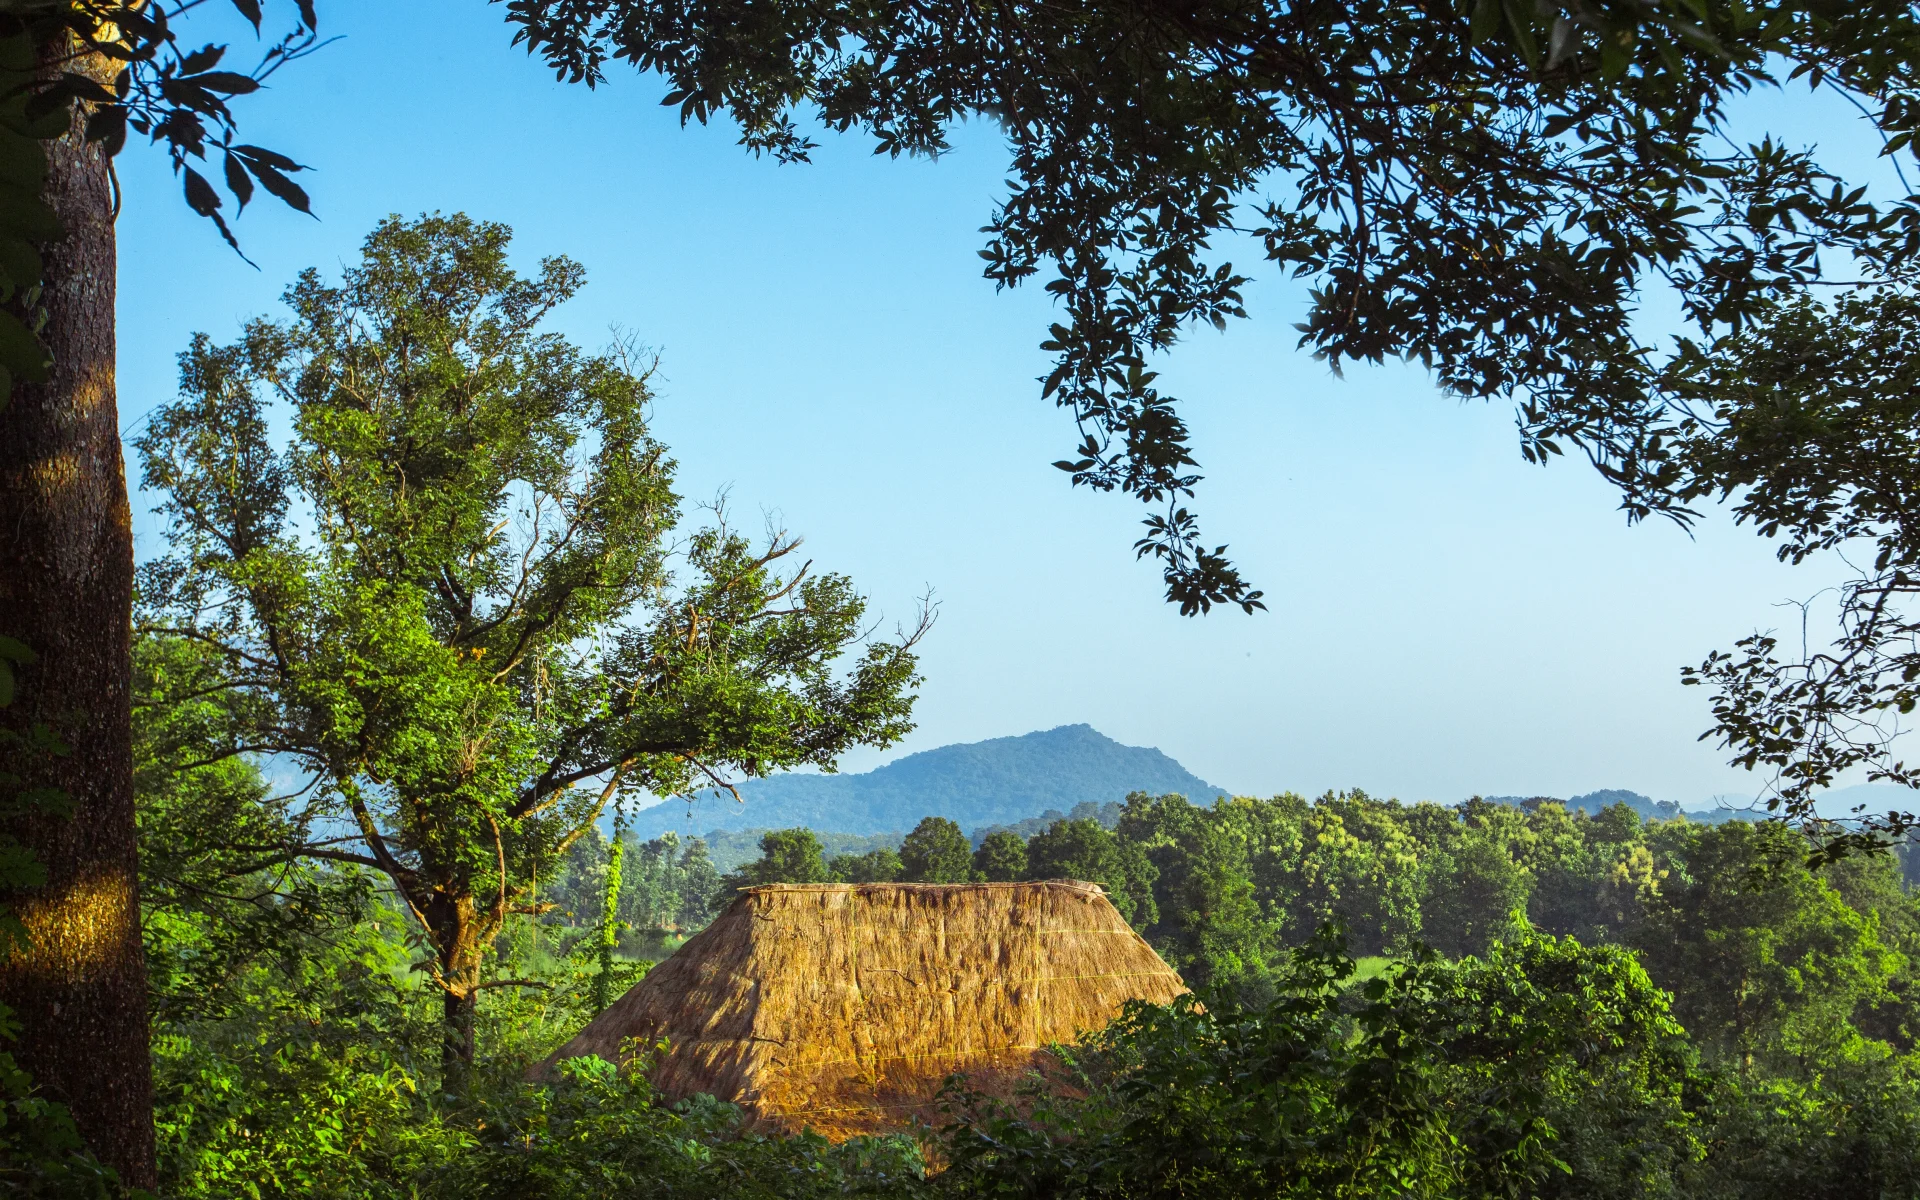 One of the thatched-roof huts peaks out from the trees during a clear, sunny day.